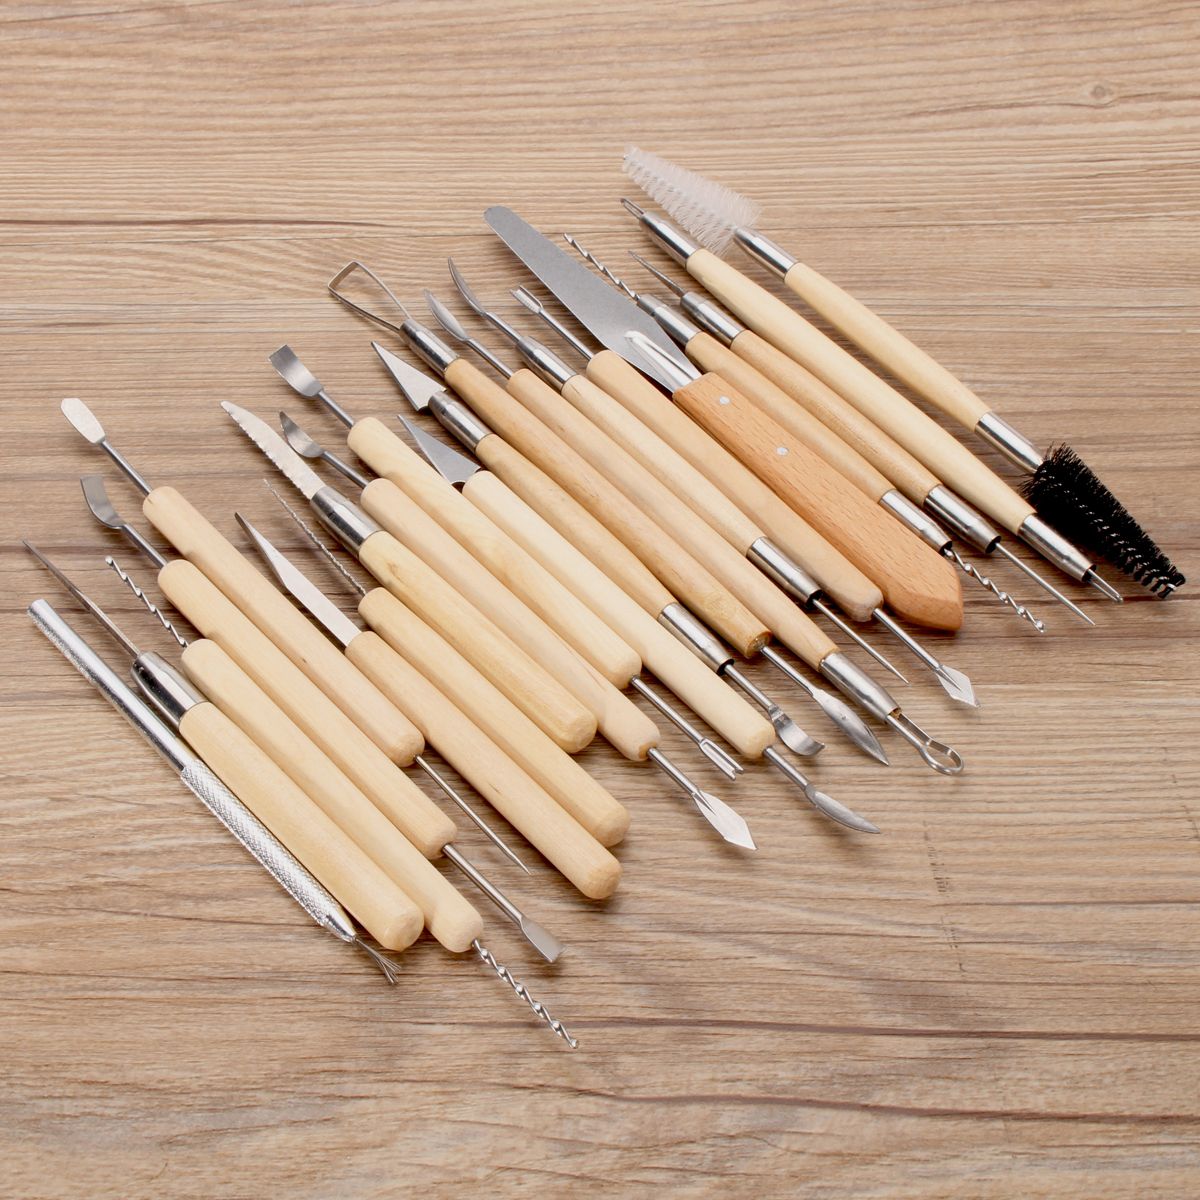 22pcs-Clay-Ceramics-Carving-Set-Candle-Pottery-Tool-Sculpting-Making-Modelling-1253046